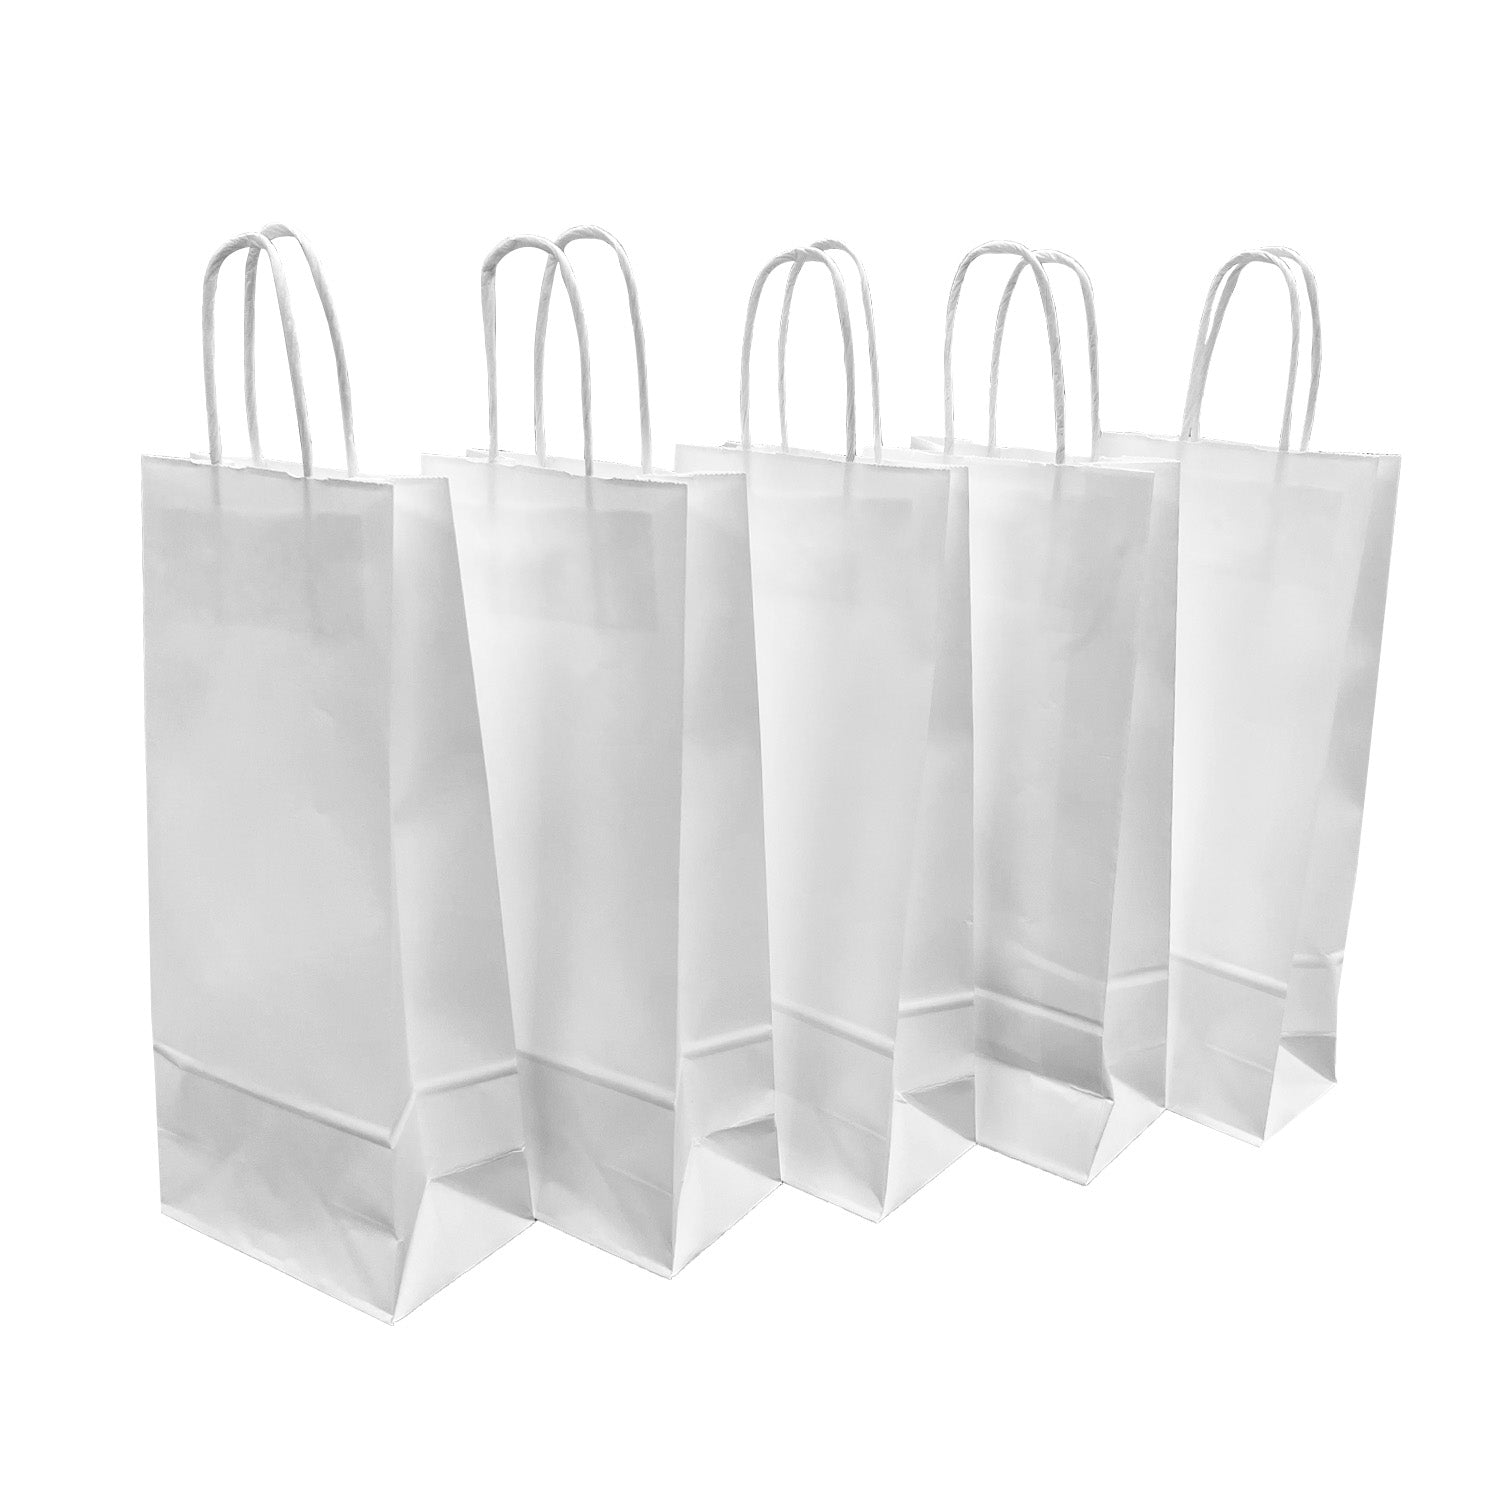 250 Pcs, Wine, 5.5x3.25x13 inches, White Kraft Paper Bags, with Twisted Handle